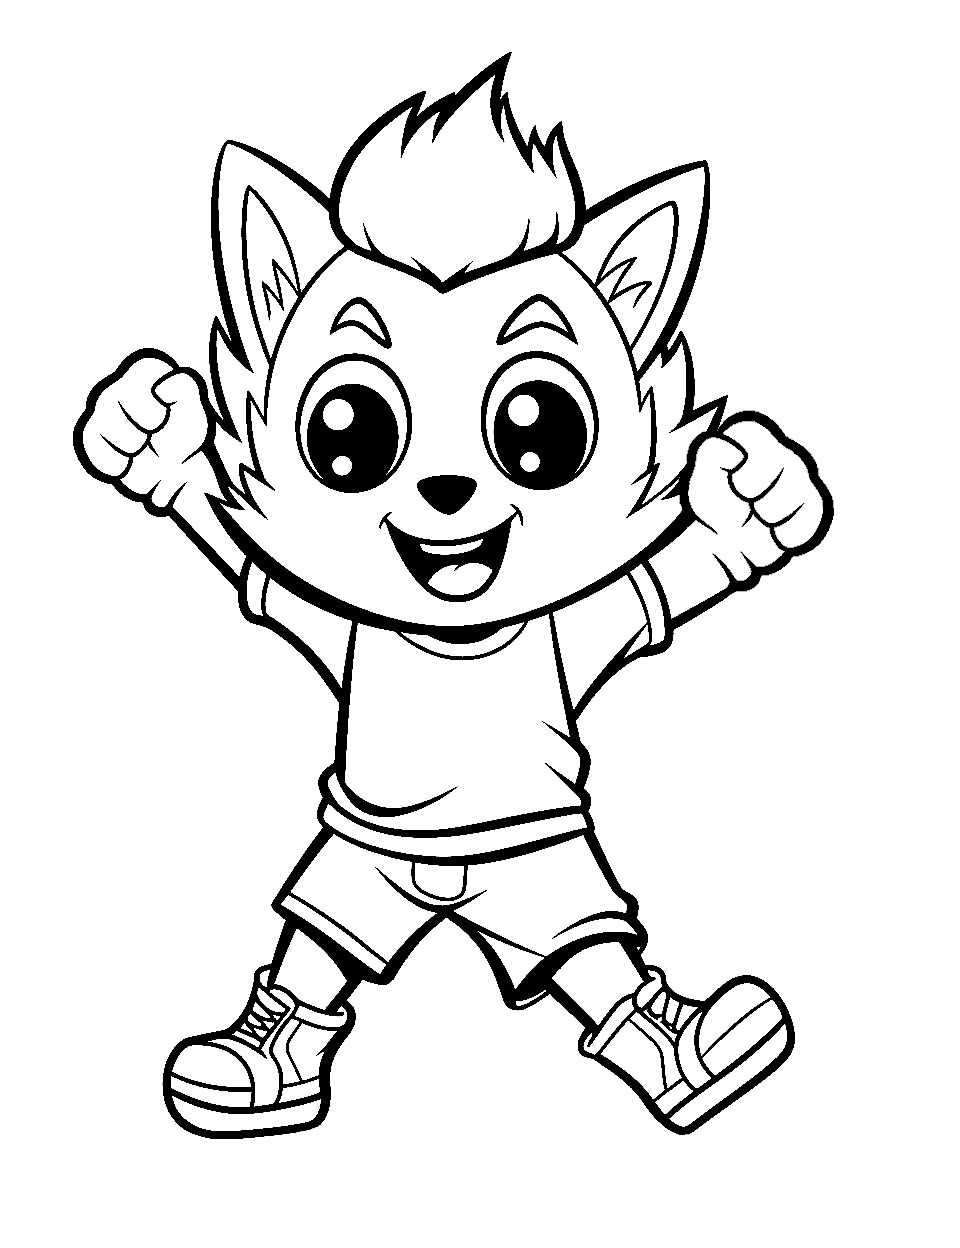 Spirited Team Mascot Coloring Page - A lively team mascot dancing on the sideline.